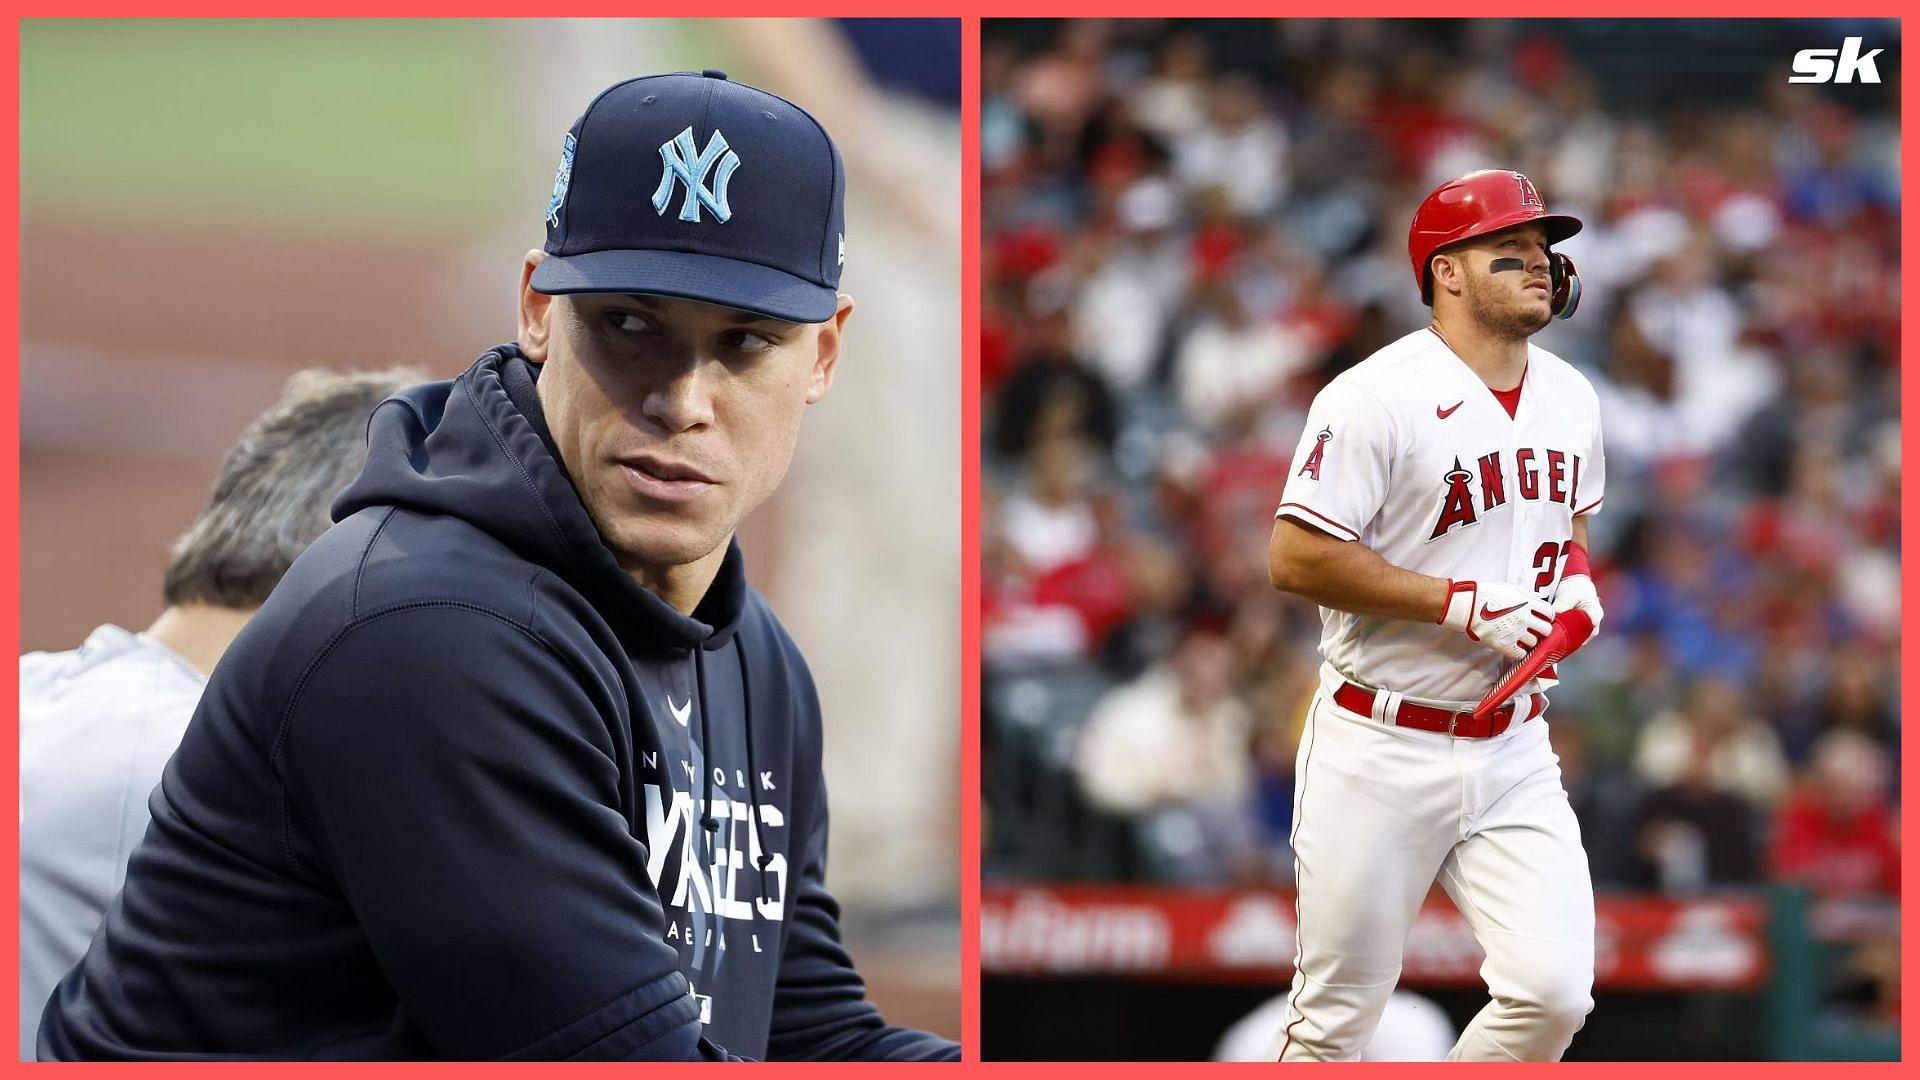 Miller: Yankees' Aaron Judge replaces Mike Trout for the moment as